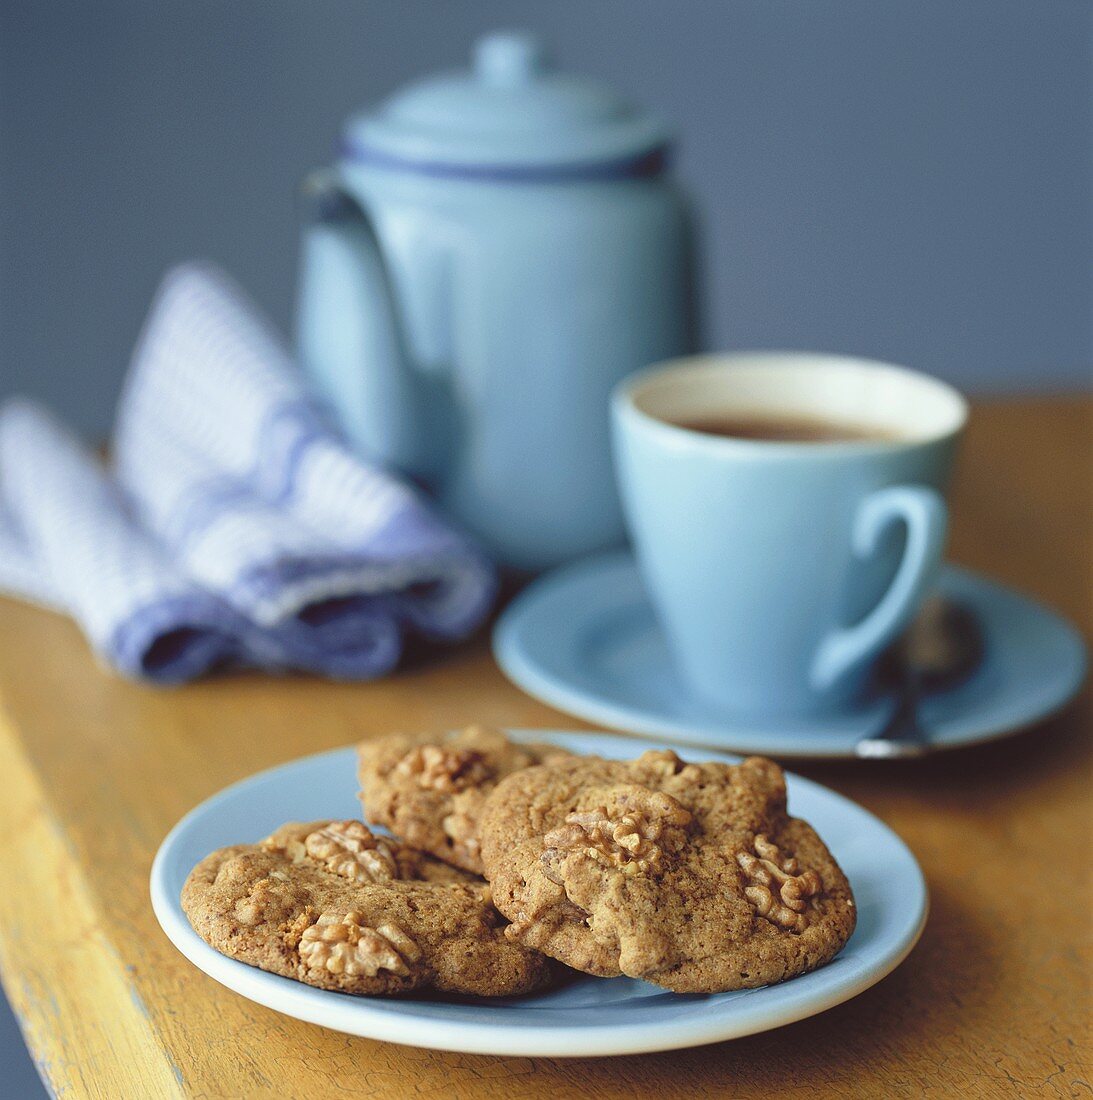 Walnut biscuits, a cup of tea and teapot